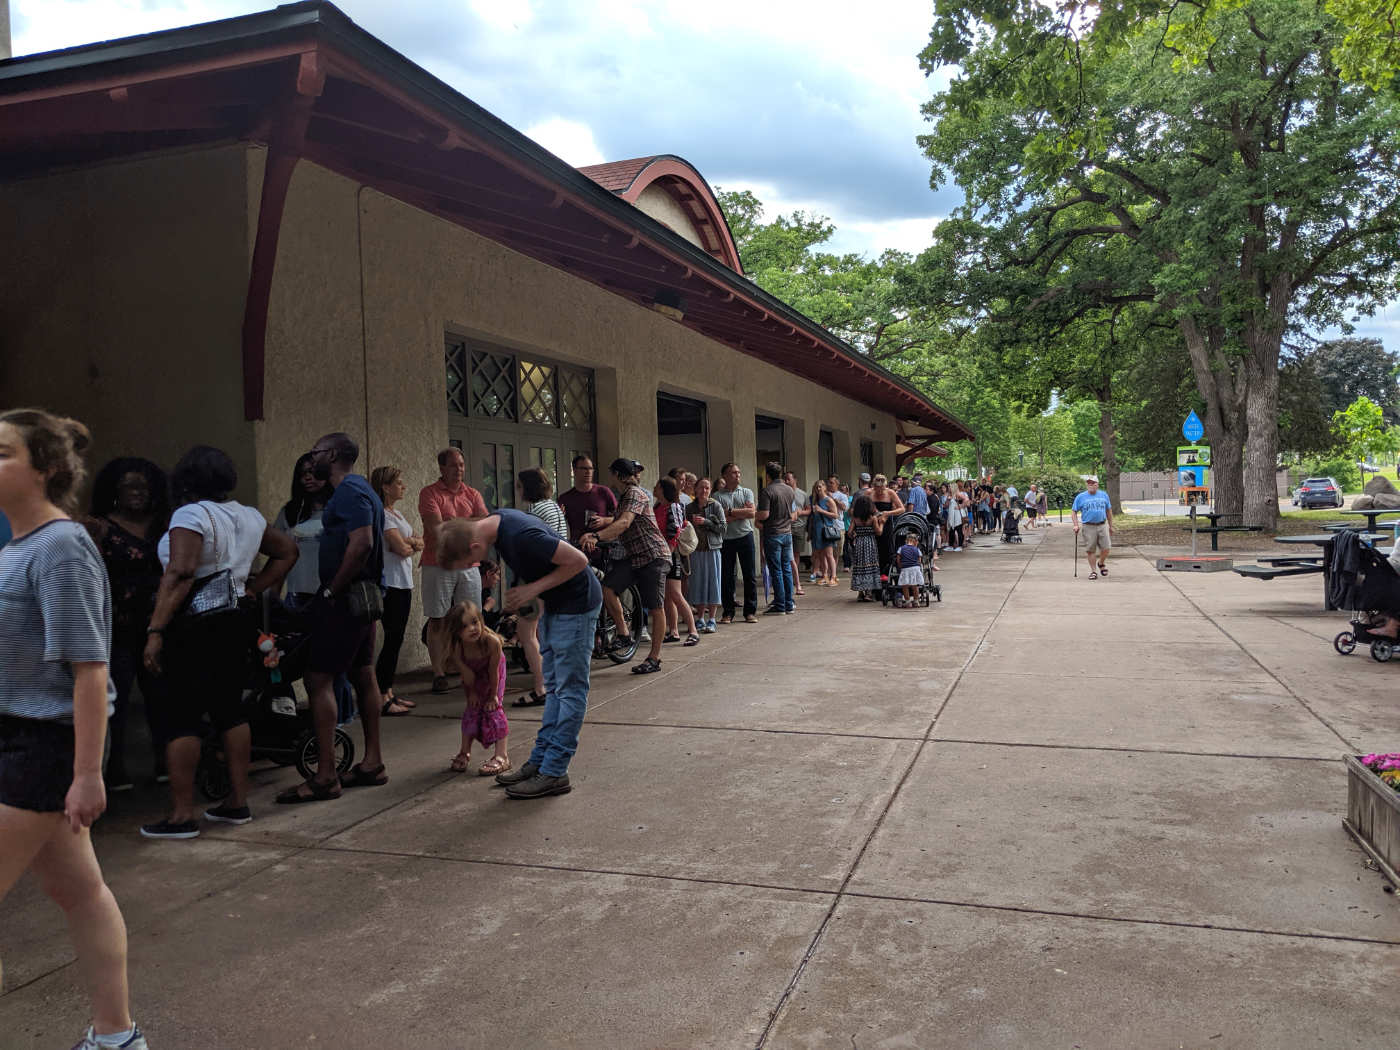 long line of people outside a park building on a summer day